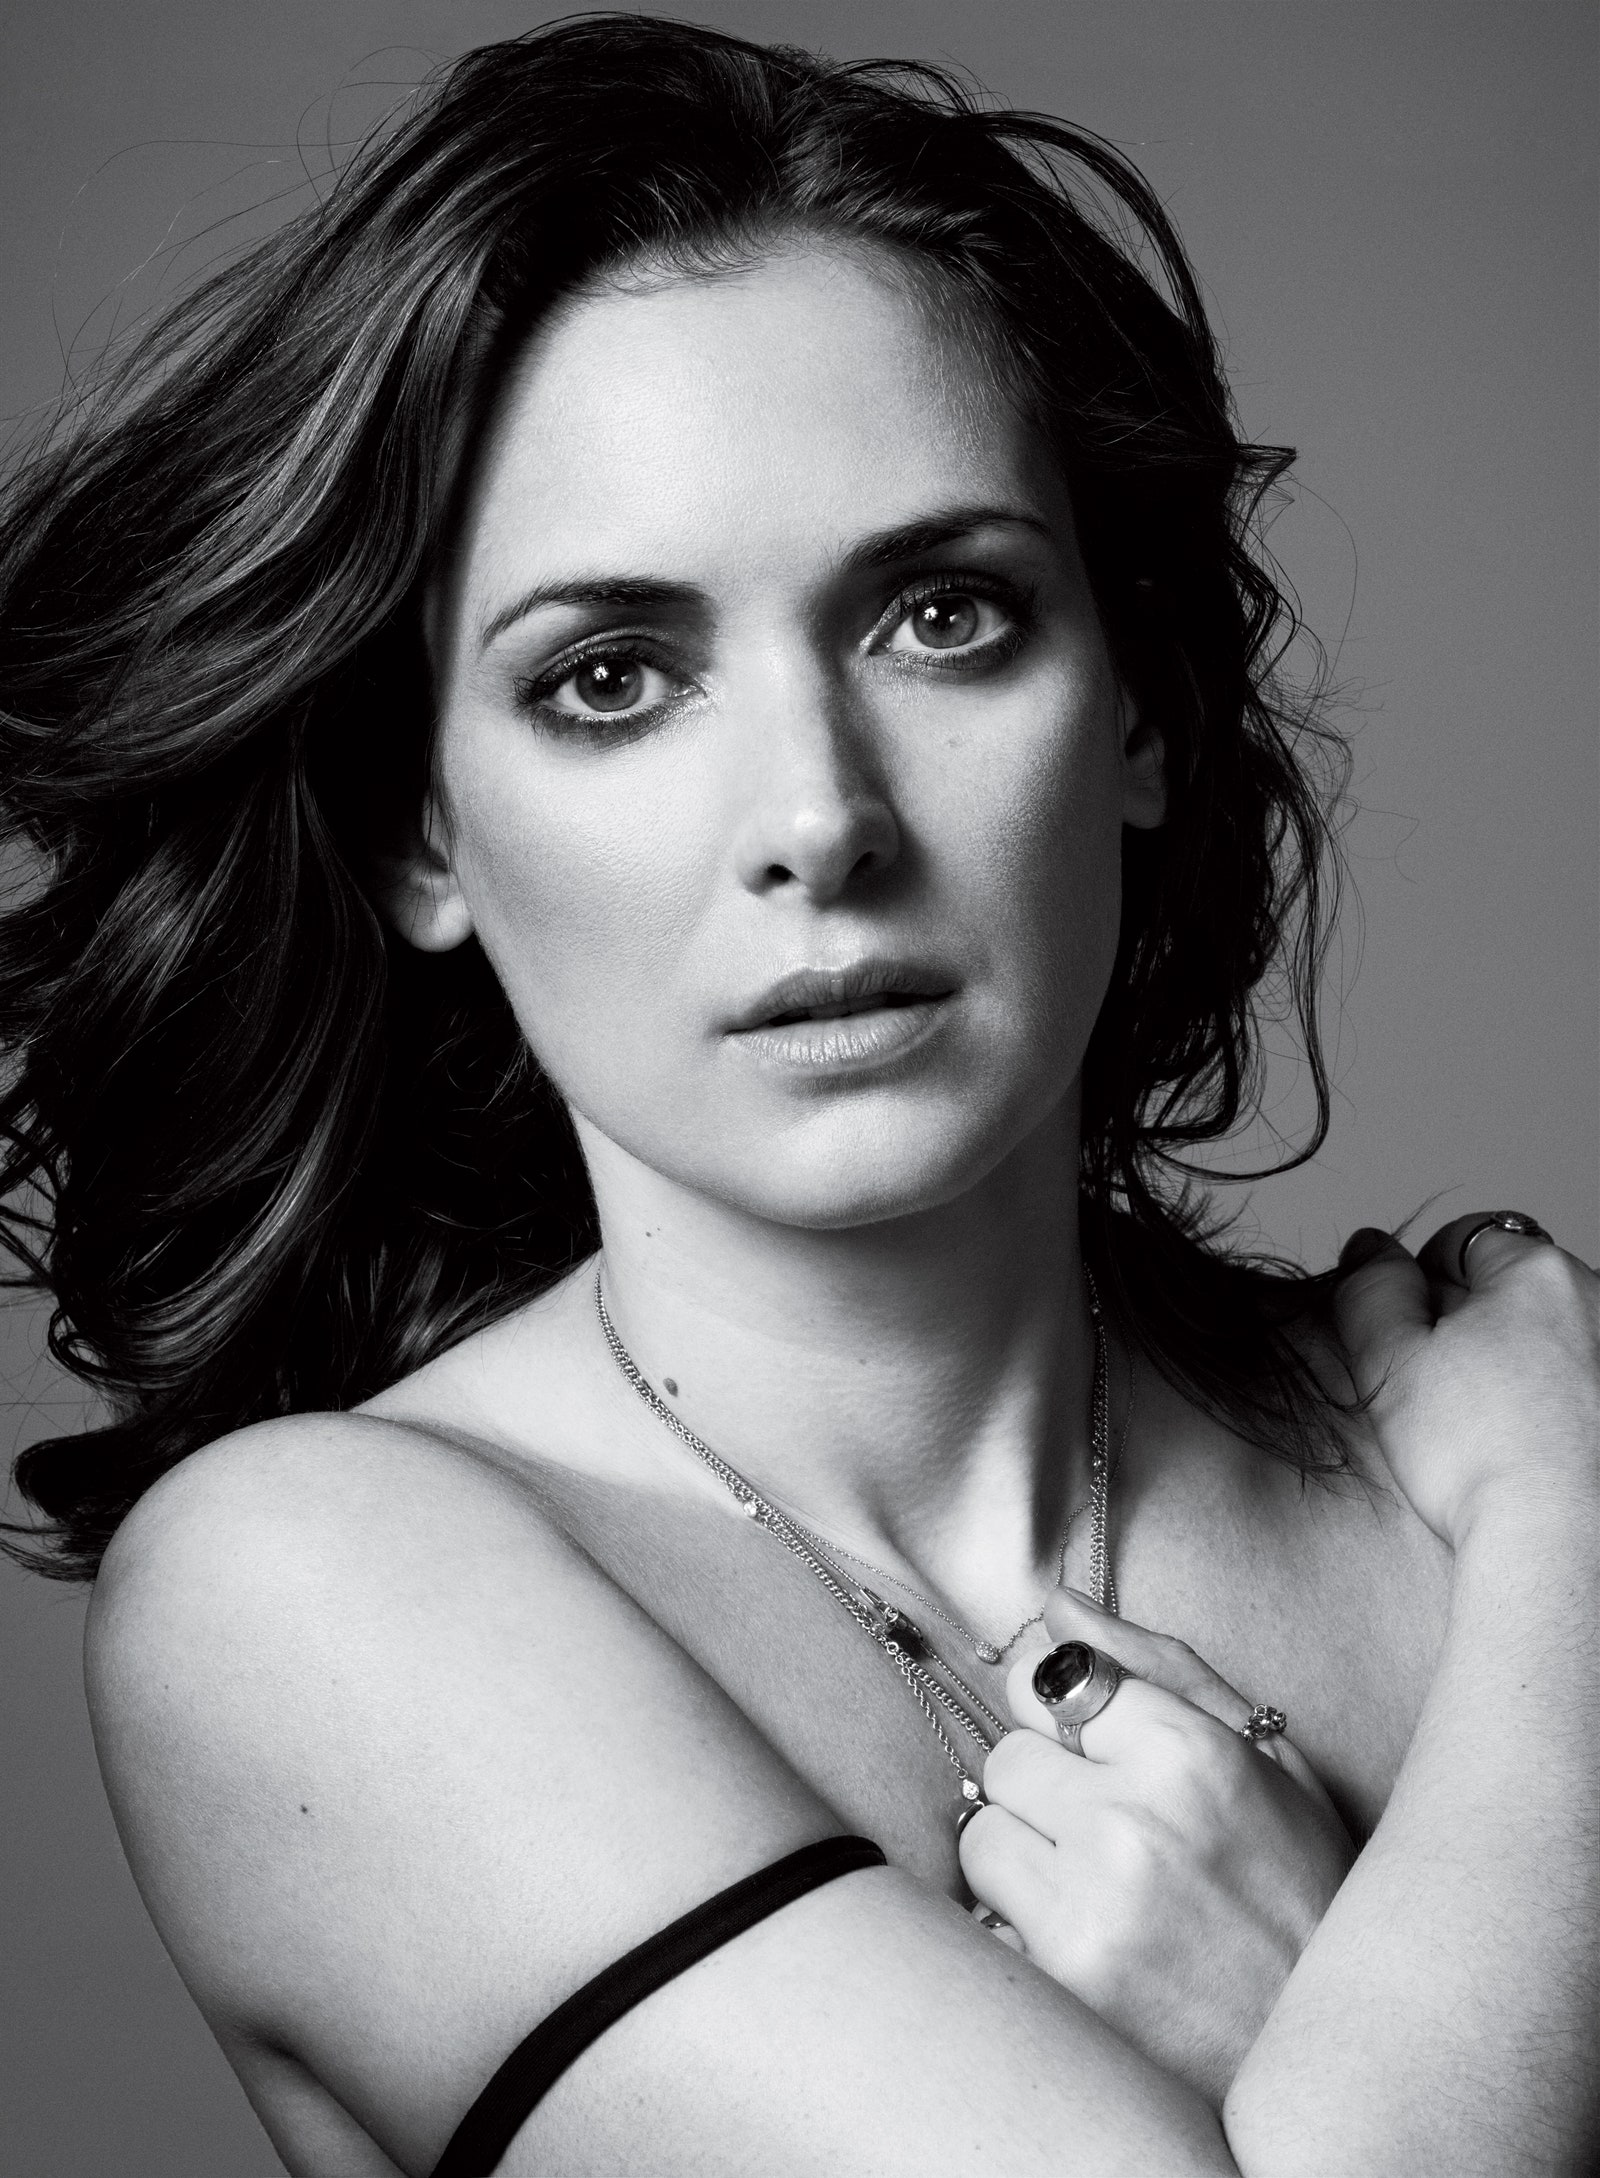 dominic corley recommends Winona Ryder Hot Pics